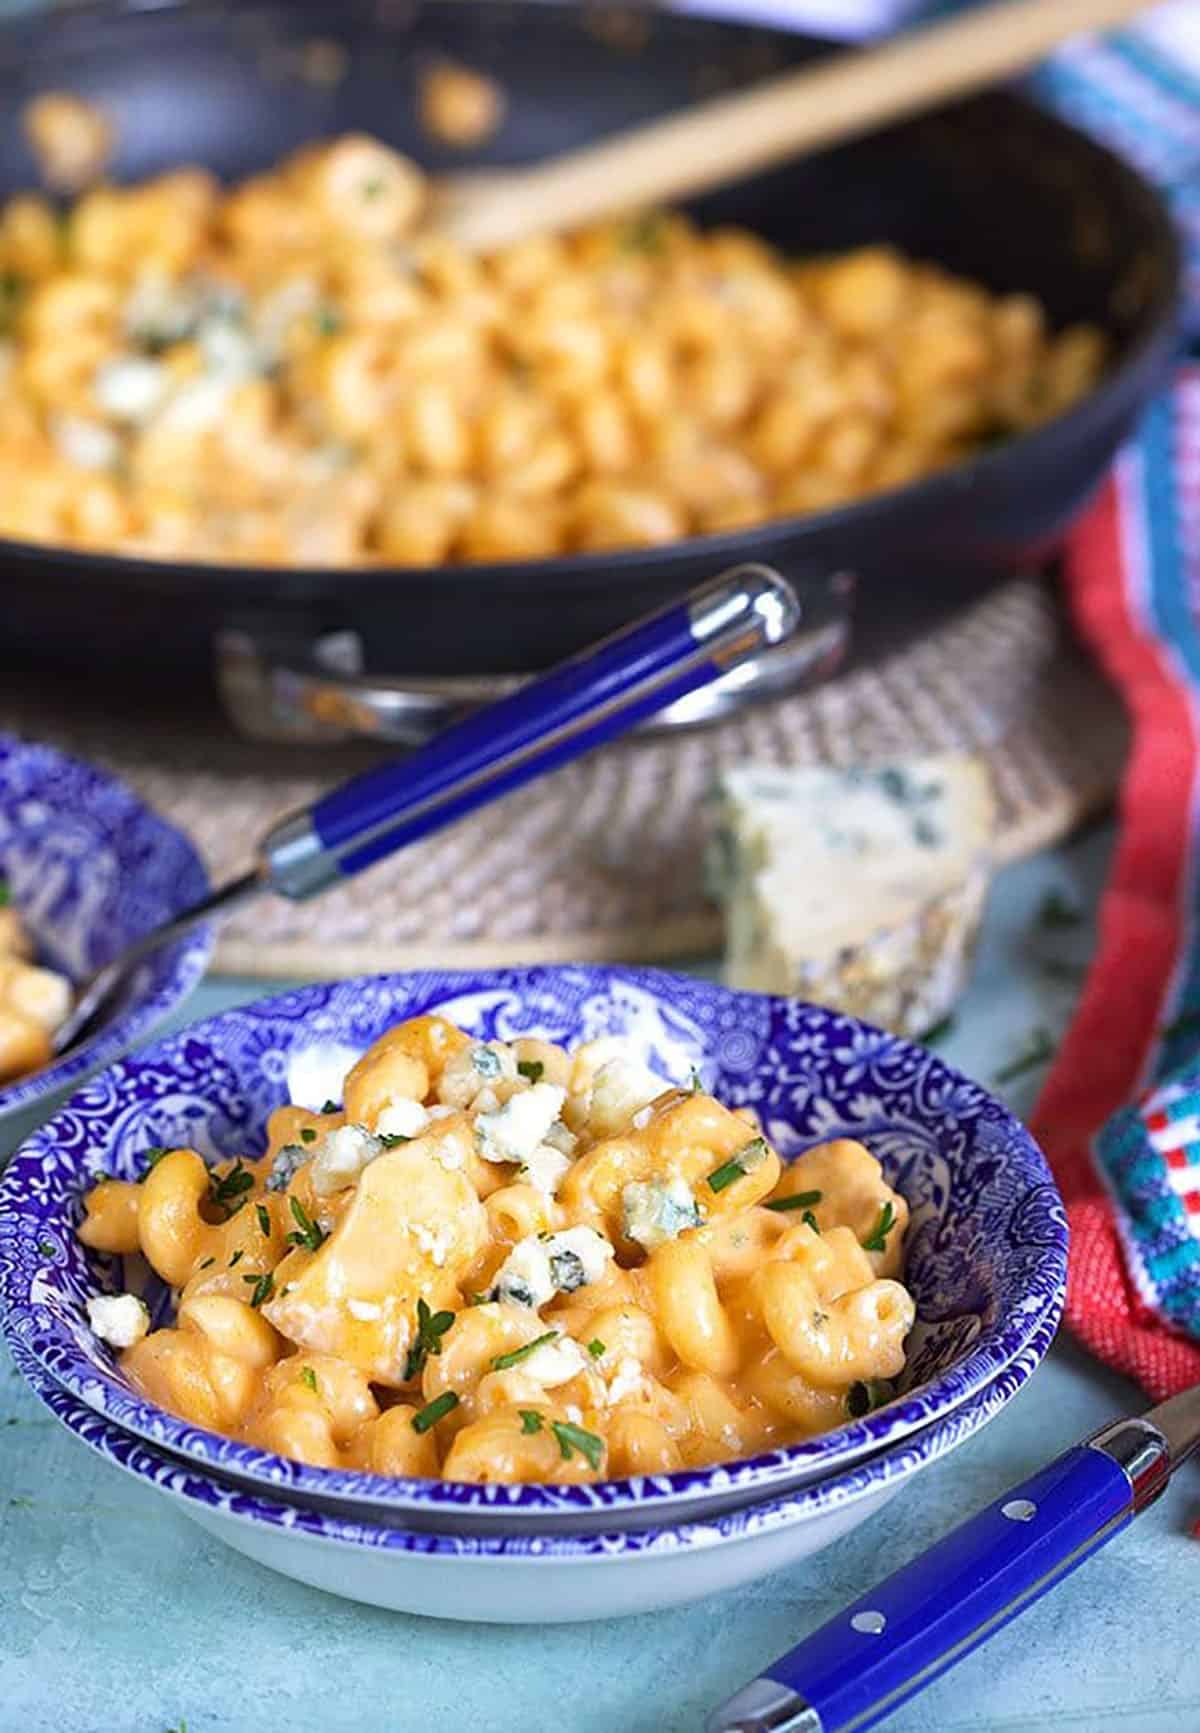 Buffalo Chicken pasta in a small blue and white bowl.